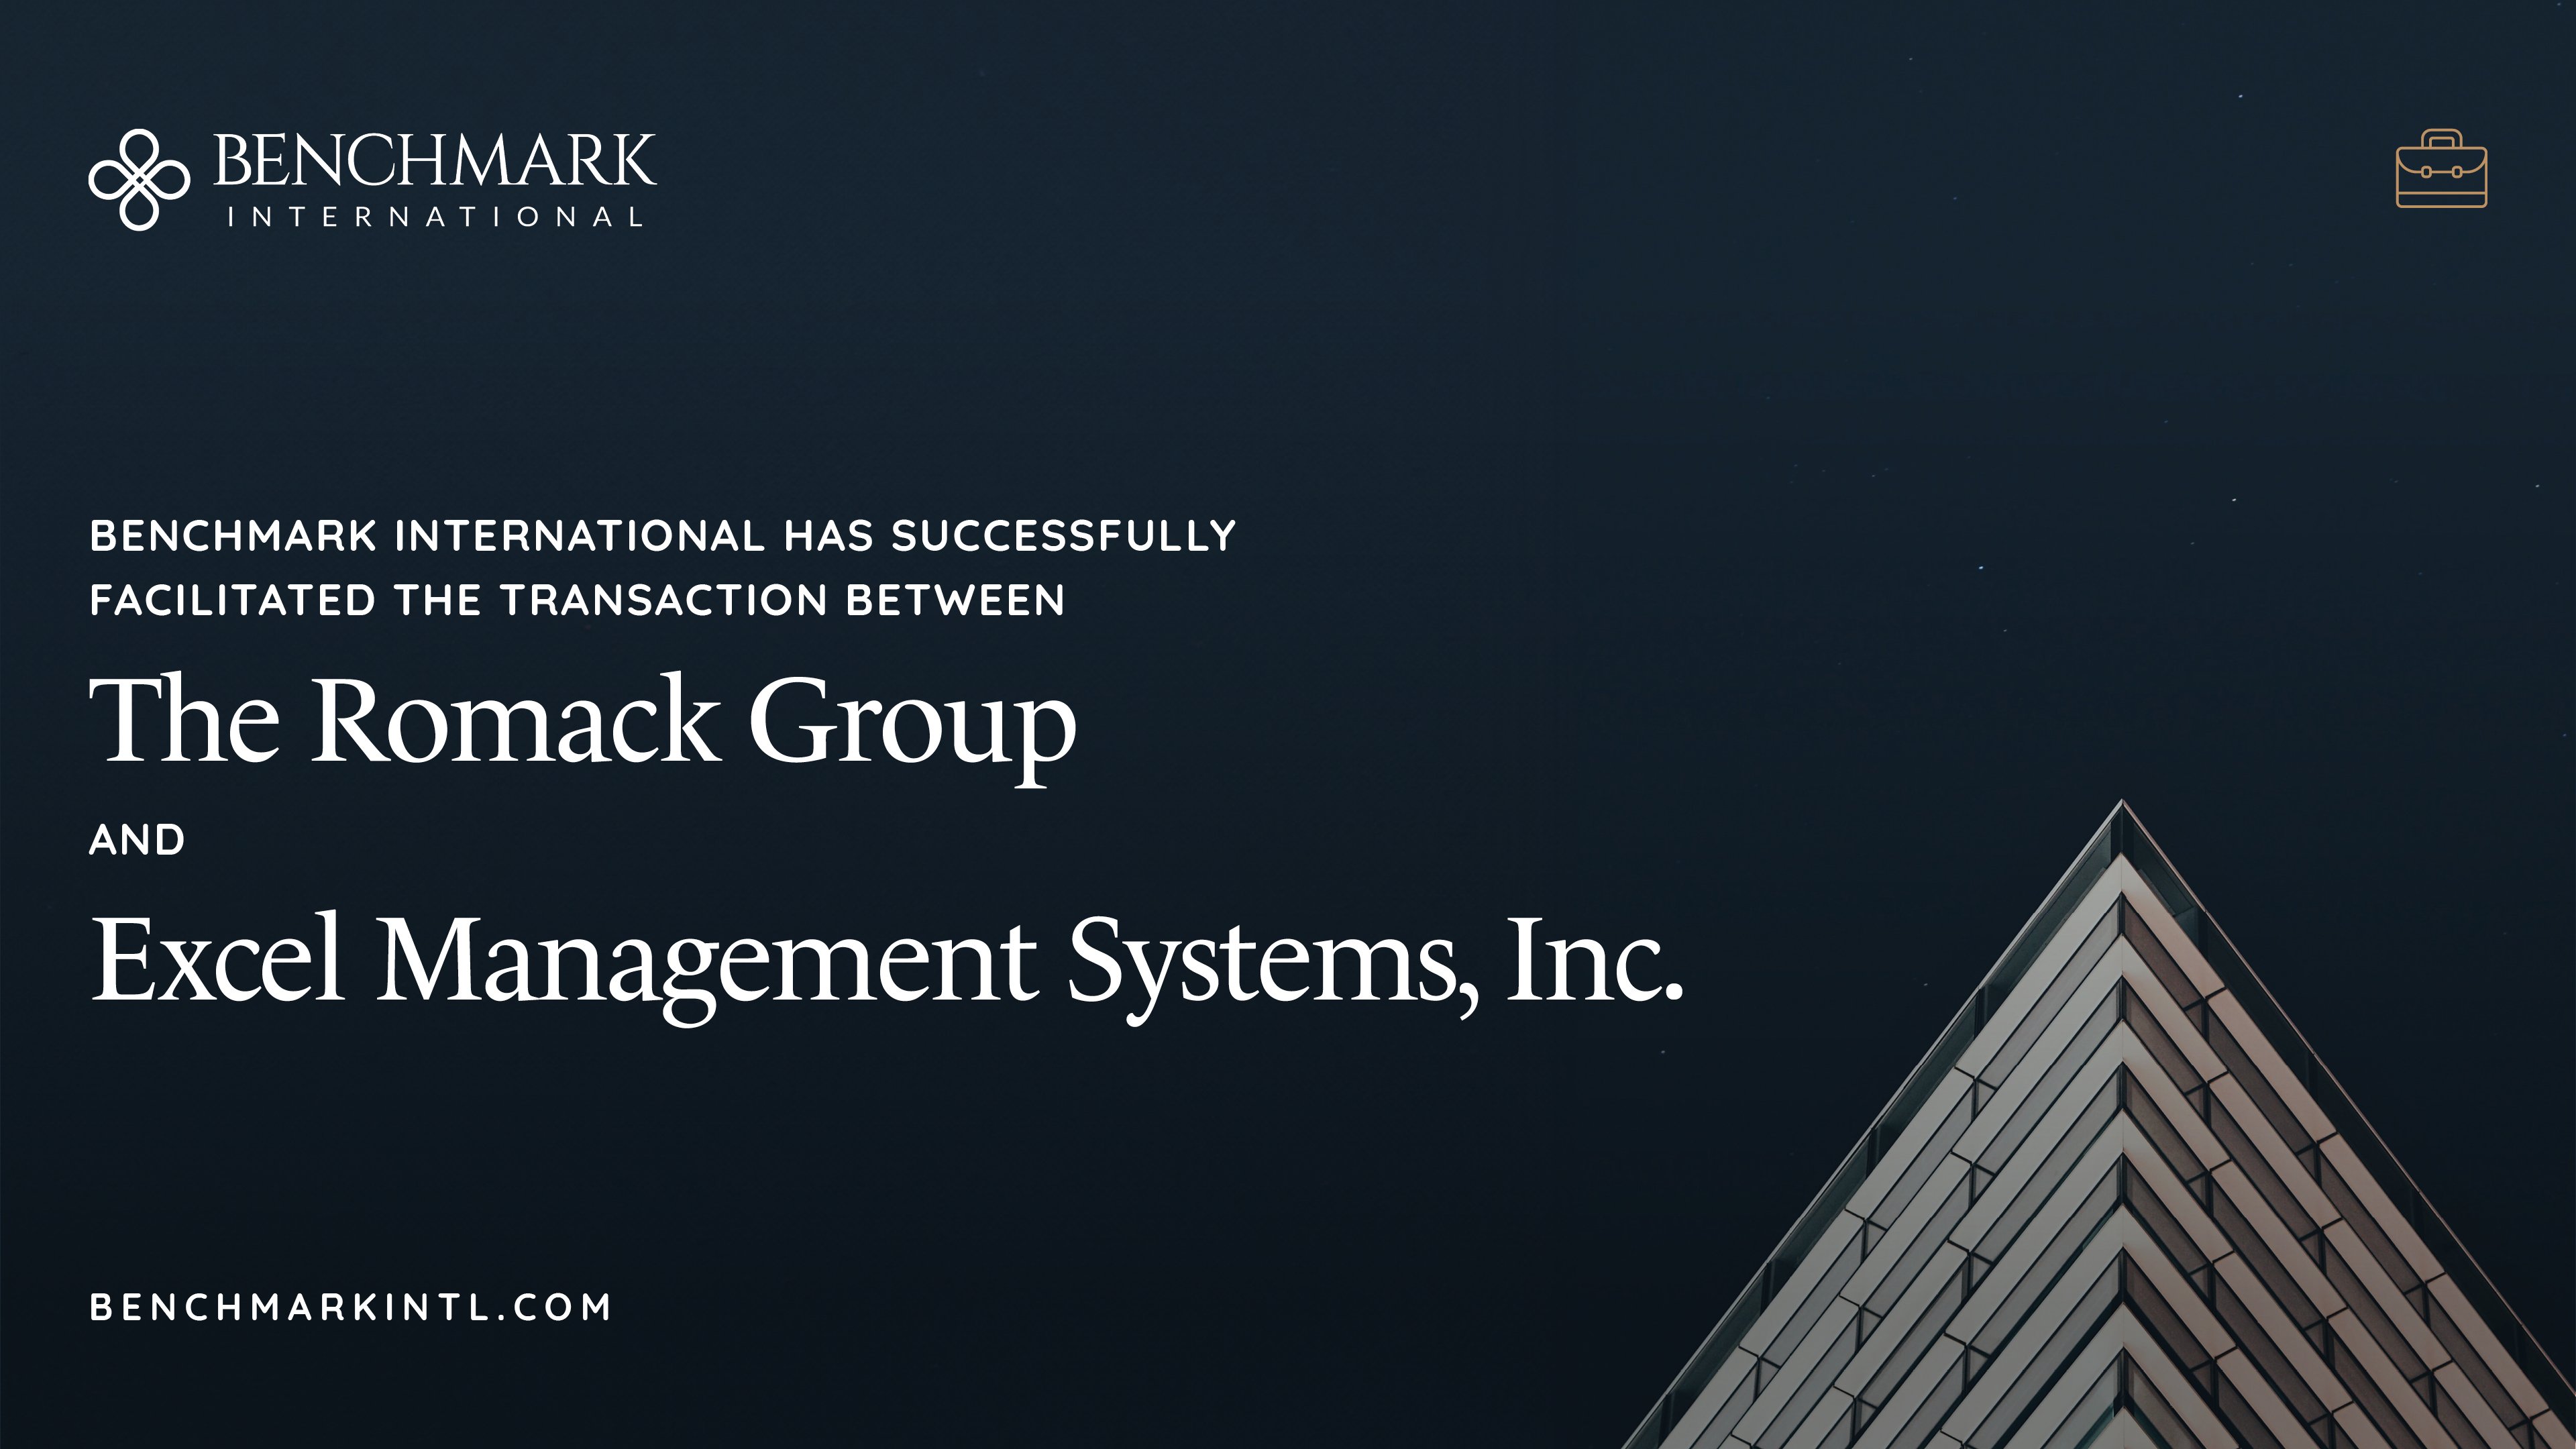 Benchmark International Successfully Facilitated The Transaction Between The Romack Group And Excel Management Systems, Inc.